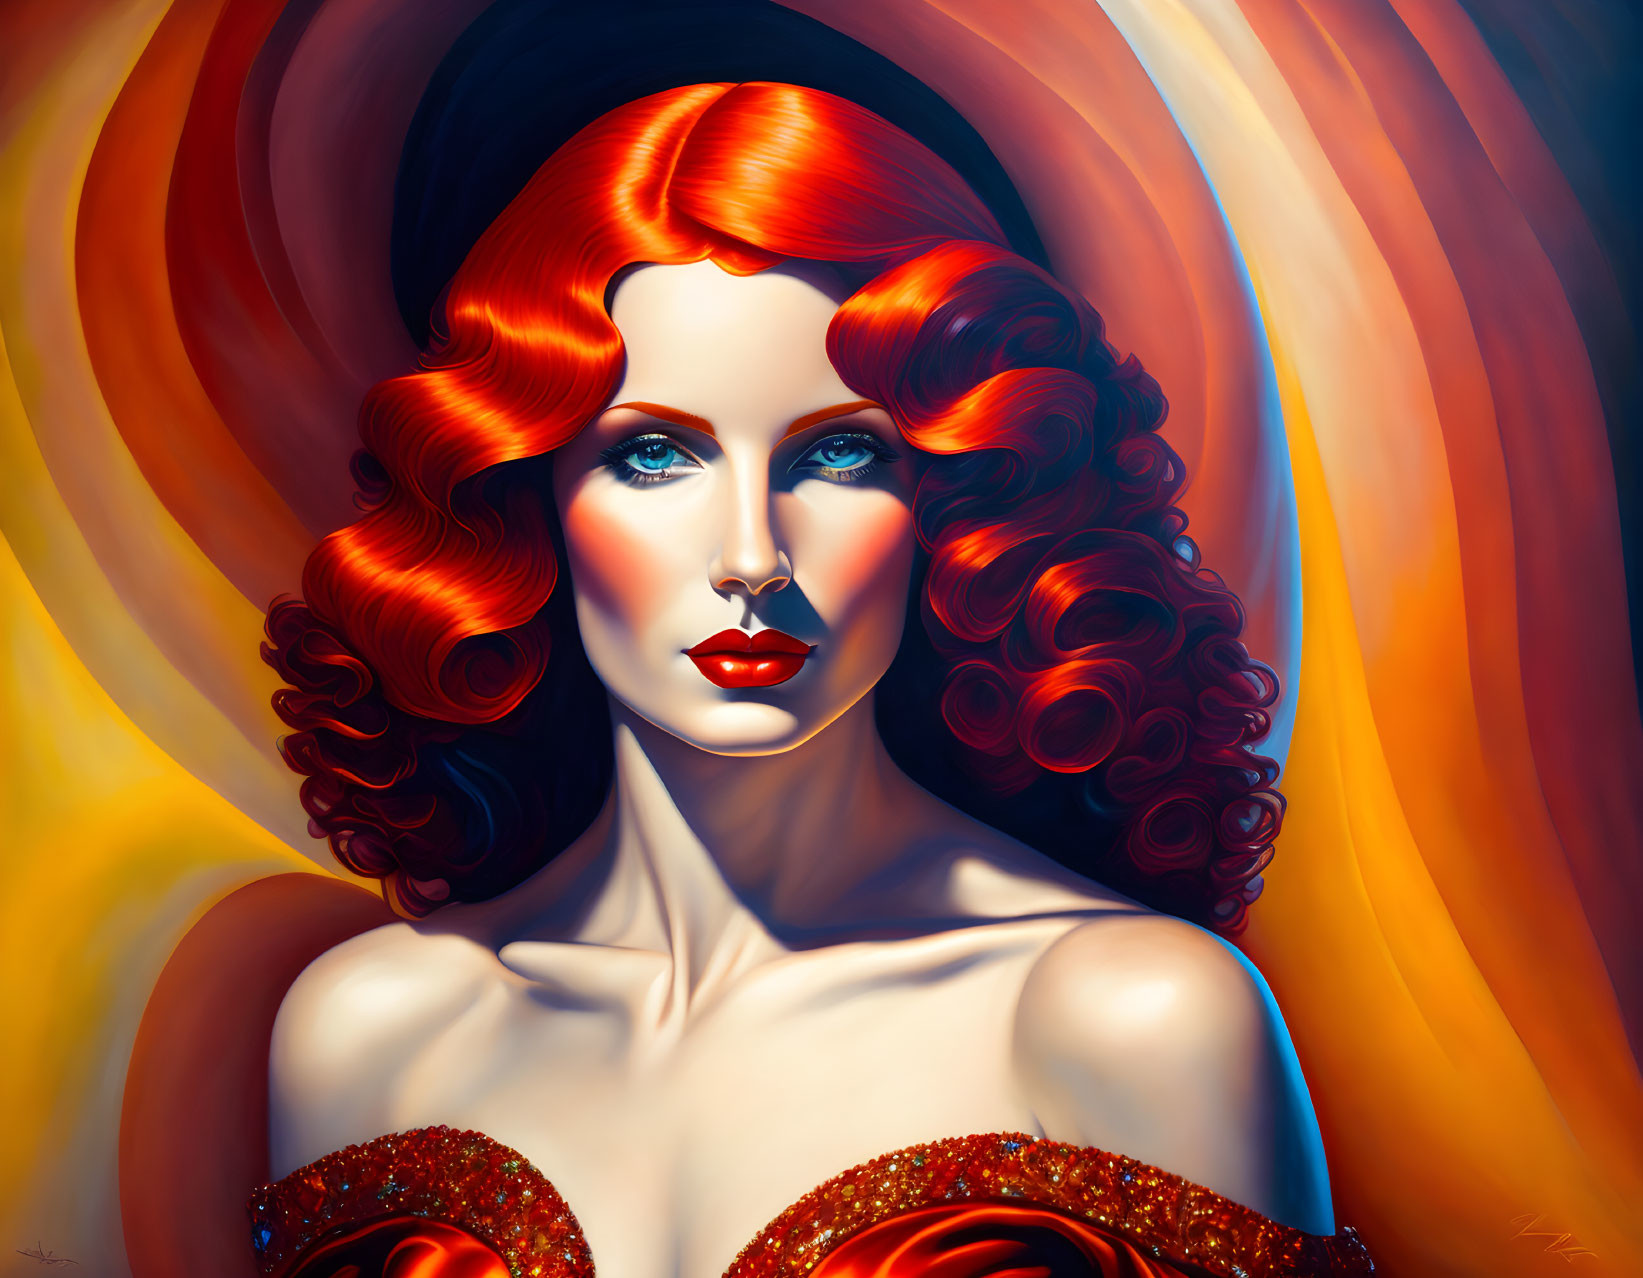 Colorful digital artwork featuring a woman with red hair and dress on a vibrant background